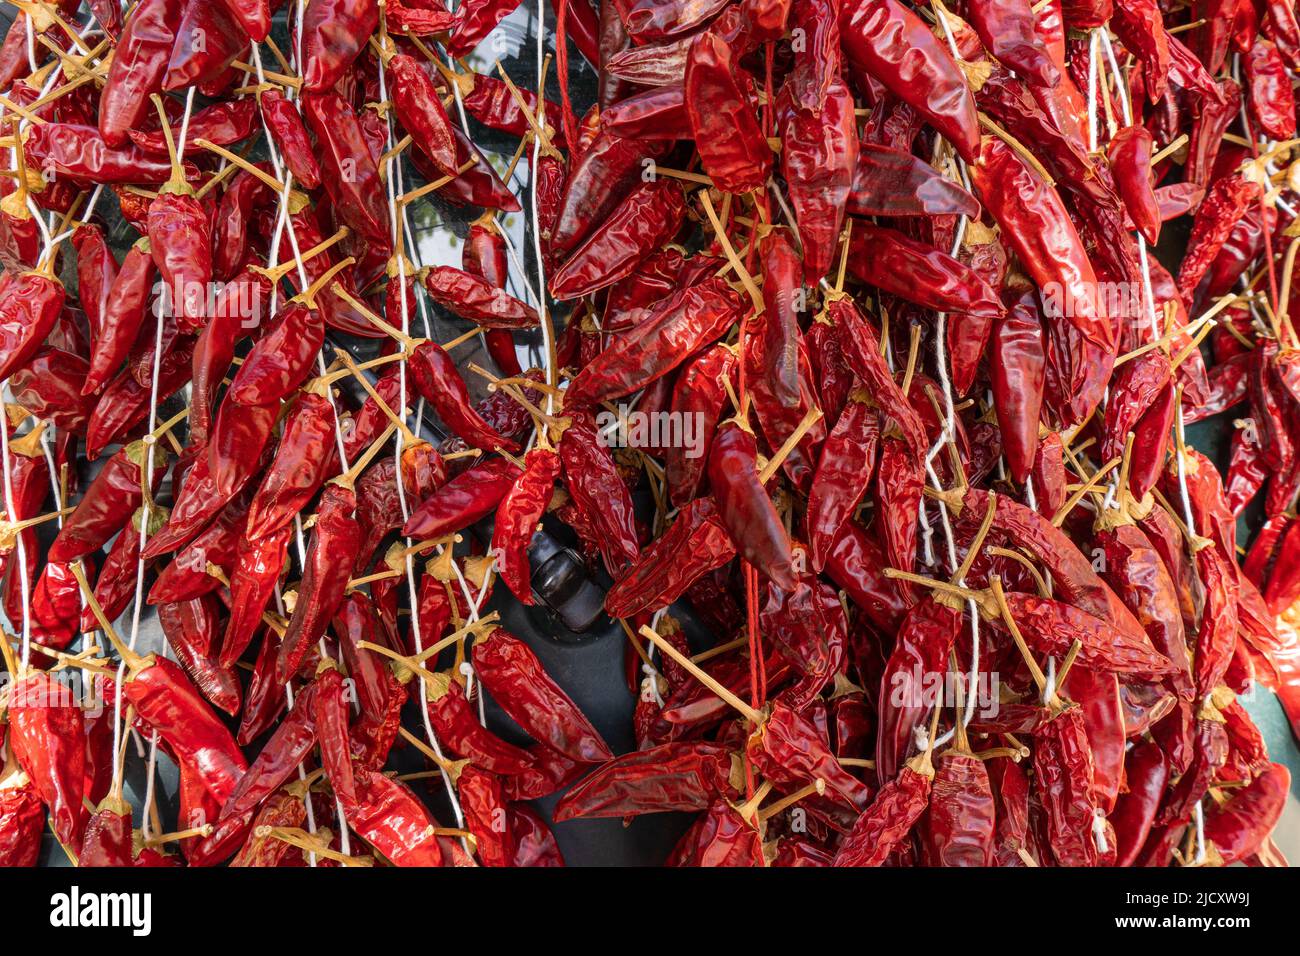 Several chili peppers hung with string to dry Stock Photo